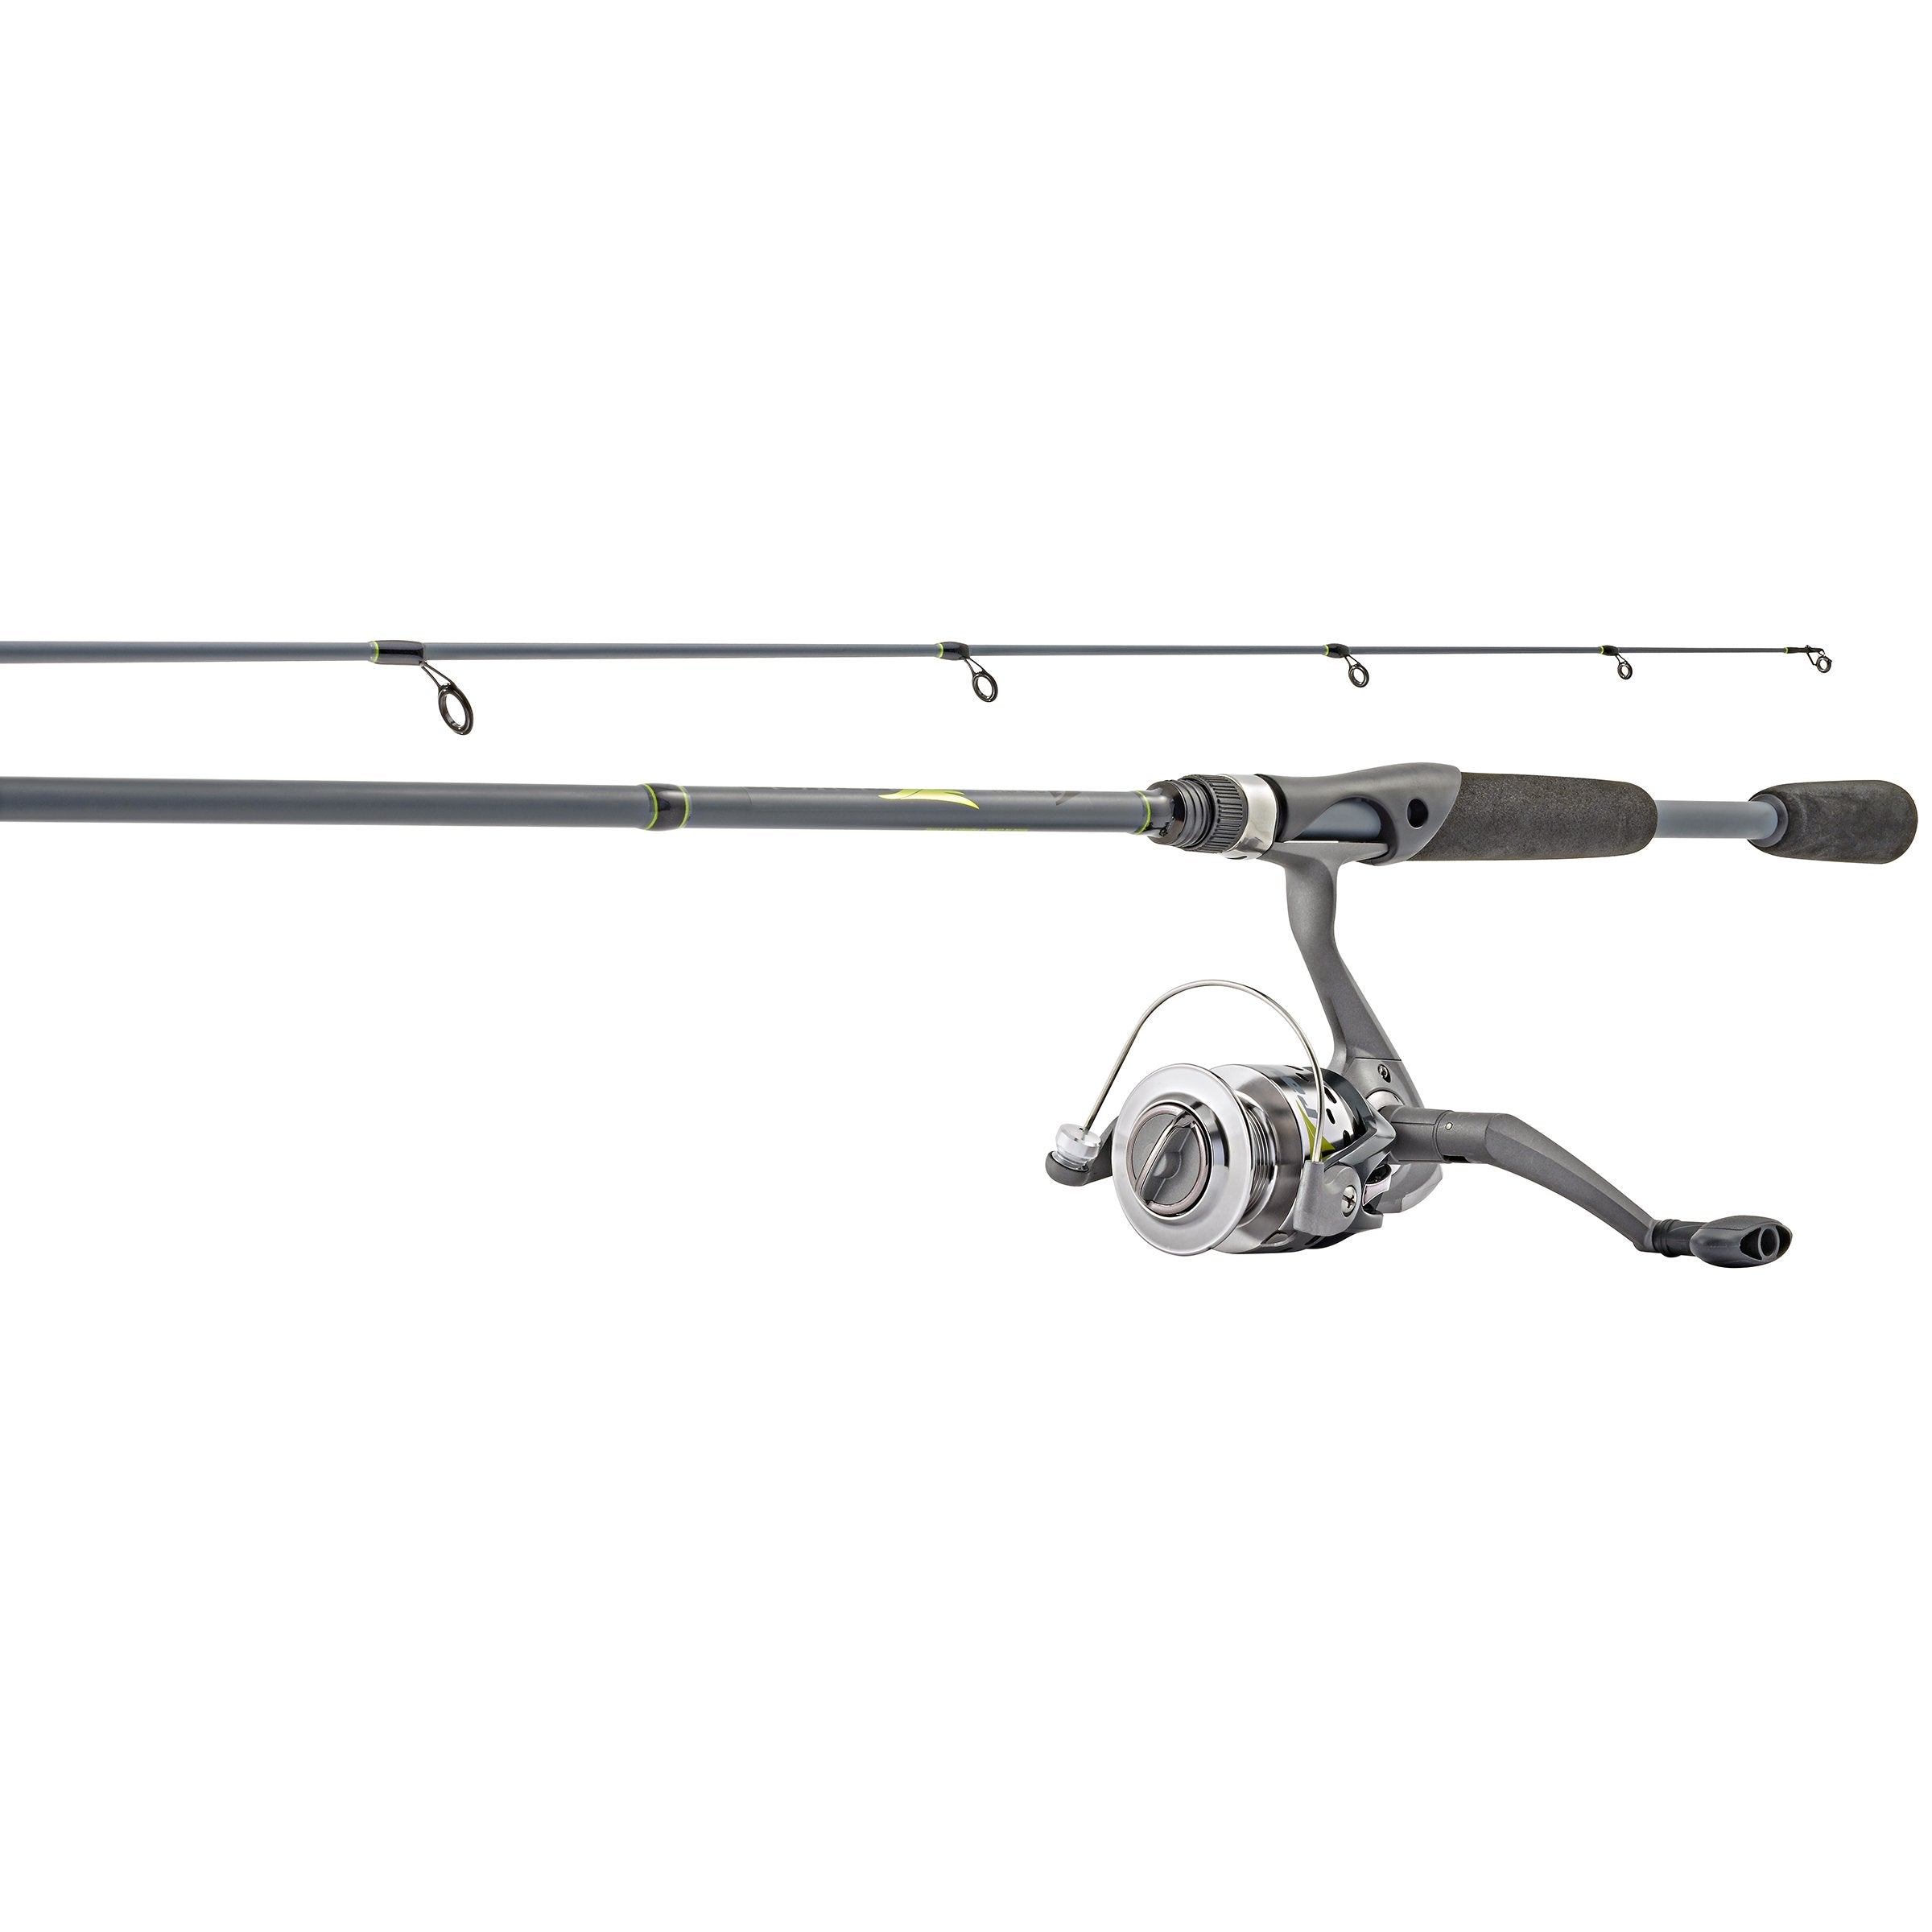  South Bend Microlite S-Class Spinning Combo : General Sporting  Equipment : Sports & Outdoors